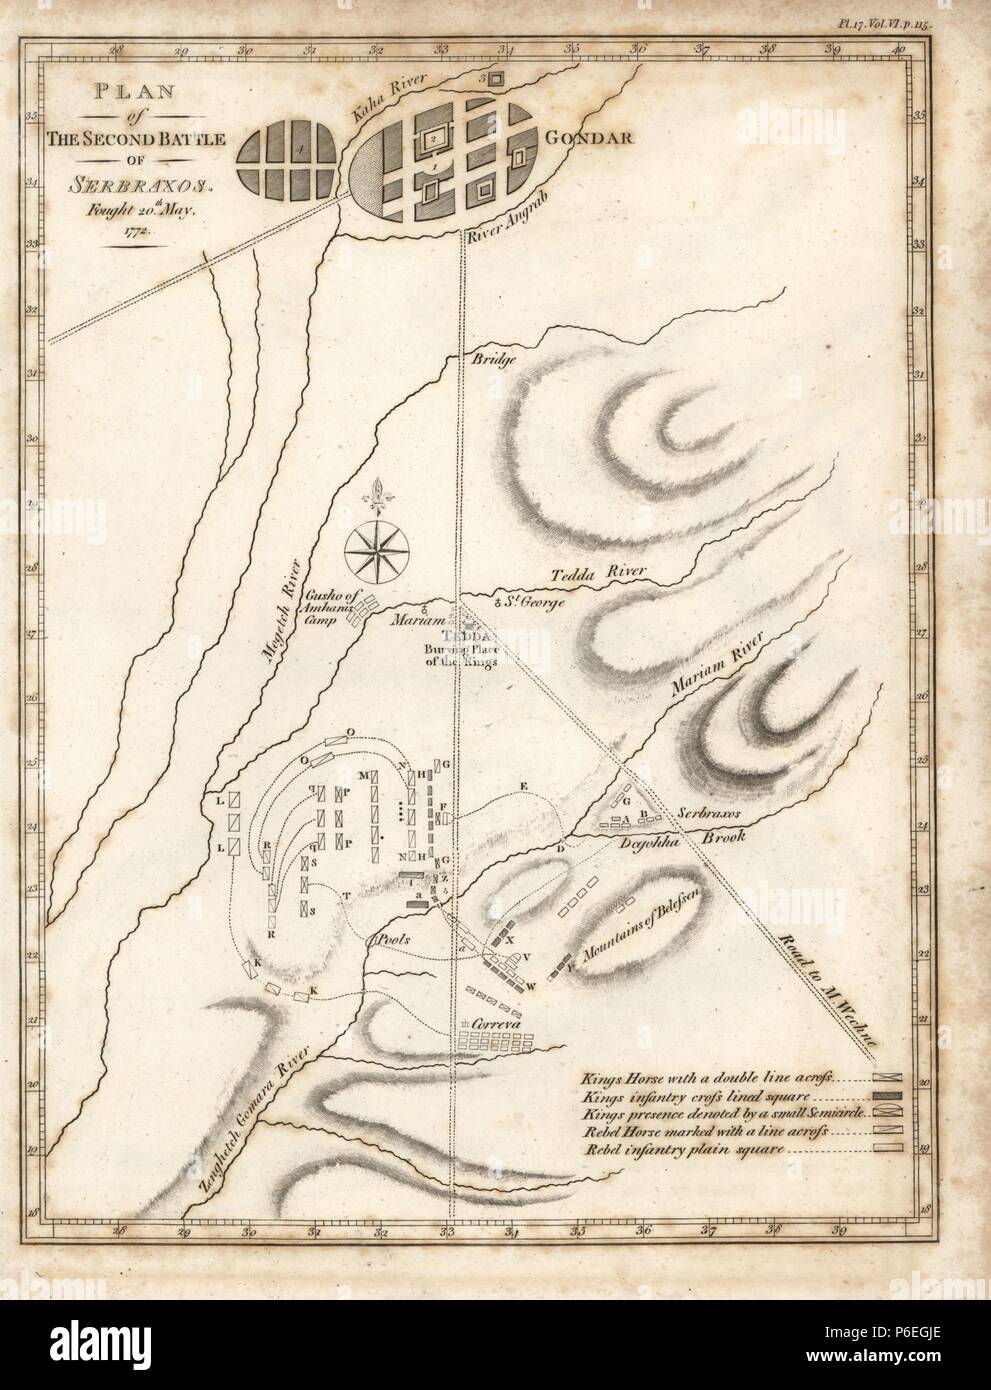 Plan of the second battle of Serbraxos, 20 May 1772. Copperplate engraving from James Bruce's 'Travels to Discover the Source of the Nile, in the years 1768, 1769, 1770, 1771, 1772 and 1773,' London, 1790. James Bruce (1730-1794) was a Scottish explorer and travel writer who spent more than 12 years in North Africa and Ethiopia. Engraved by Heath after an original drawing by Bruce. Stock Photo